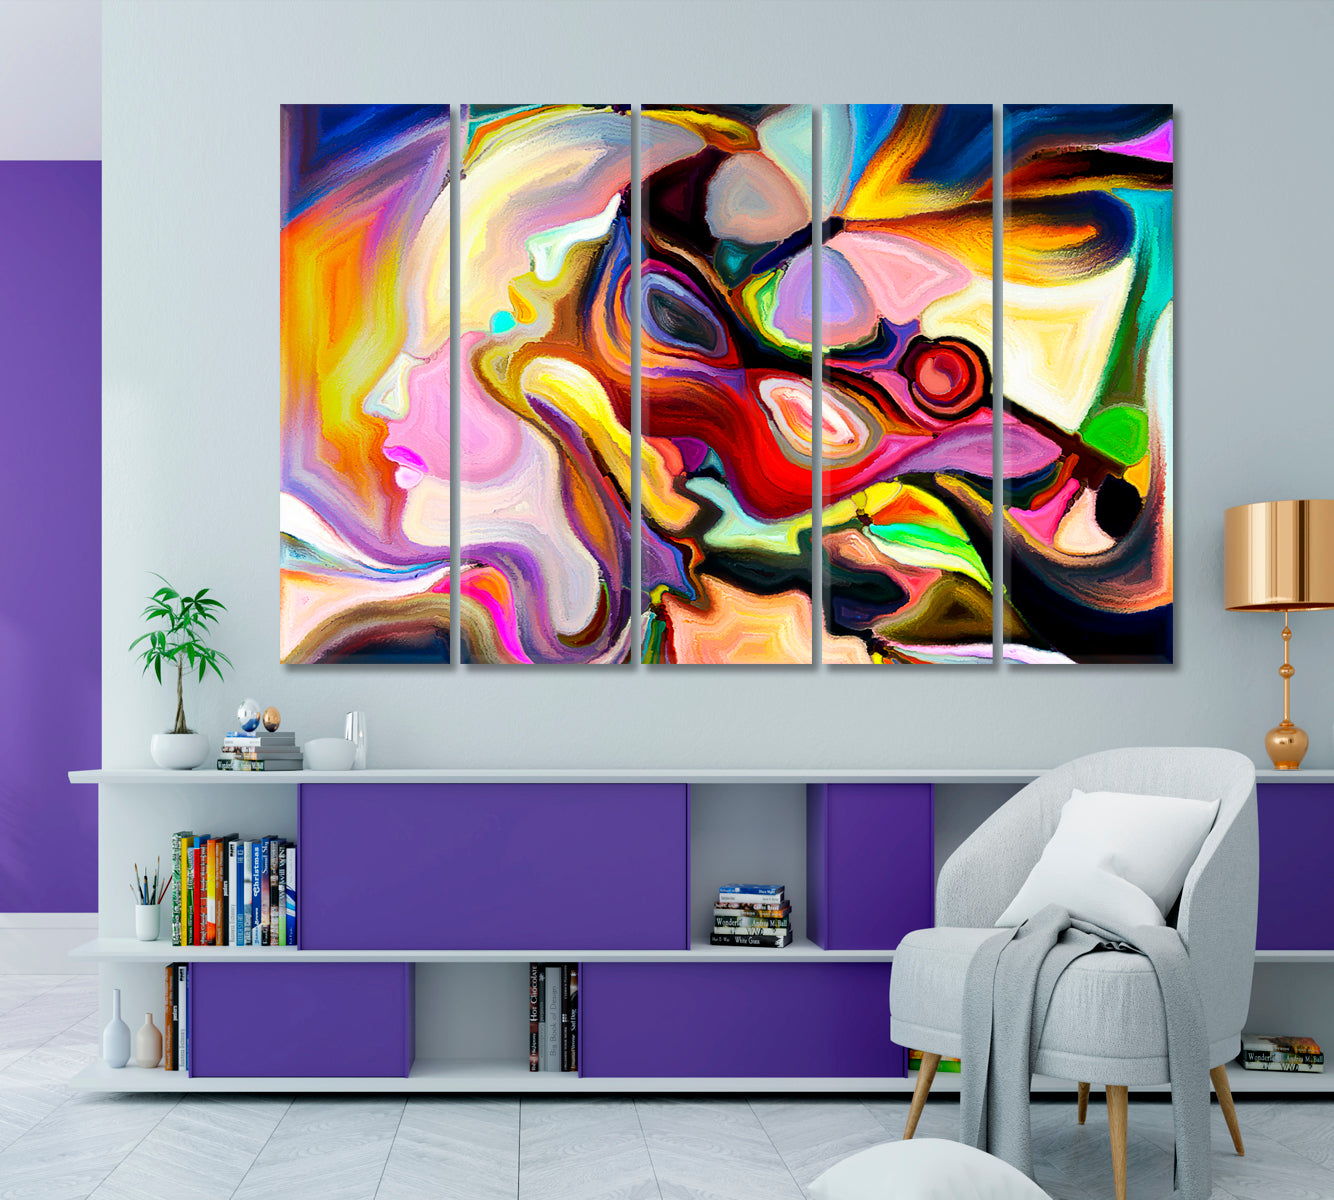 CONTEMPORARY STYLE Human and Abstract Organic Patterns Abstract Art Print Artesty 5 panels 36" x 24" 